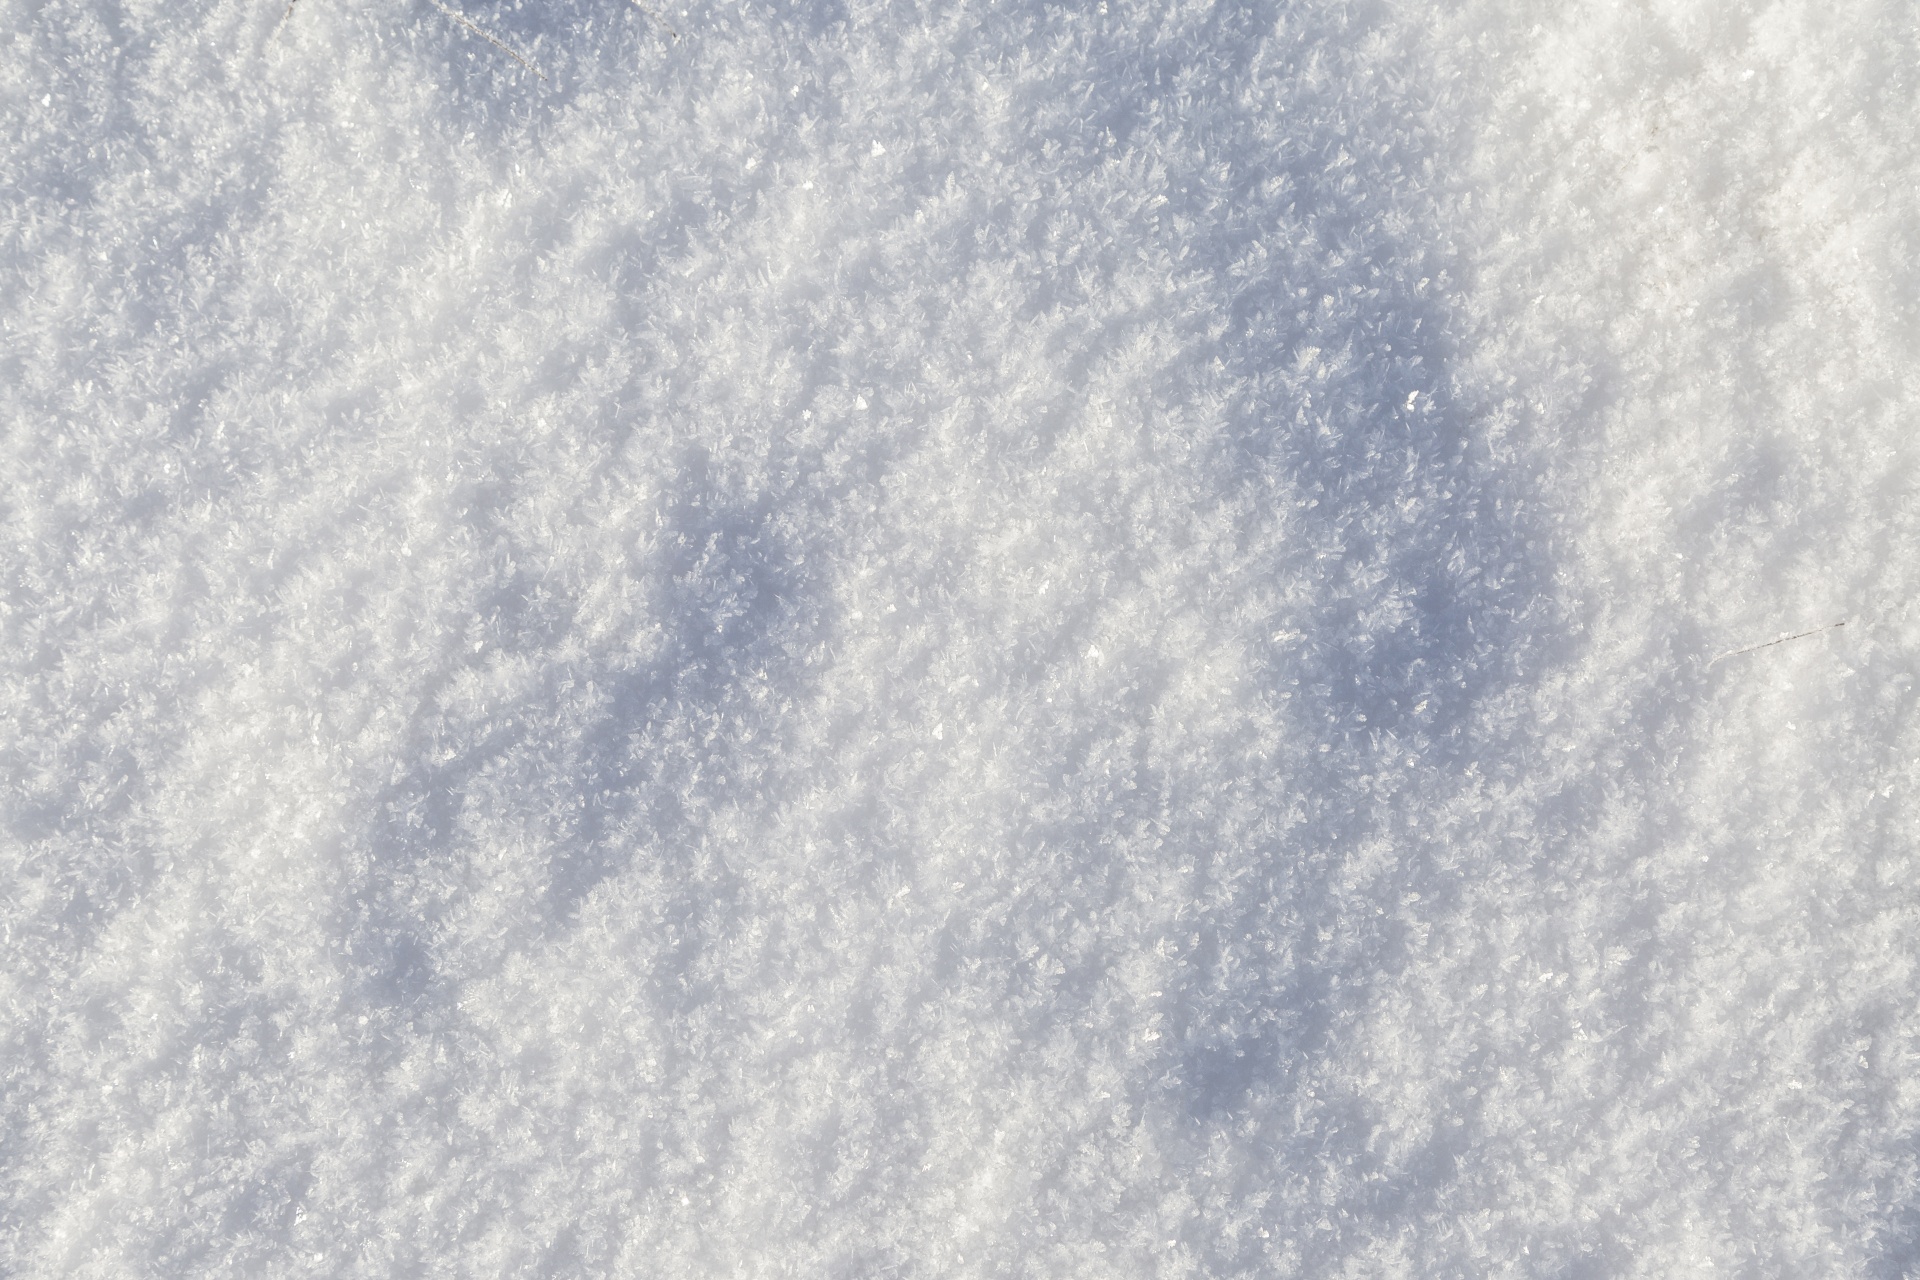 snow backgrounds snowing free photo